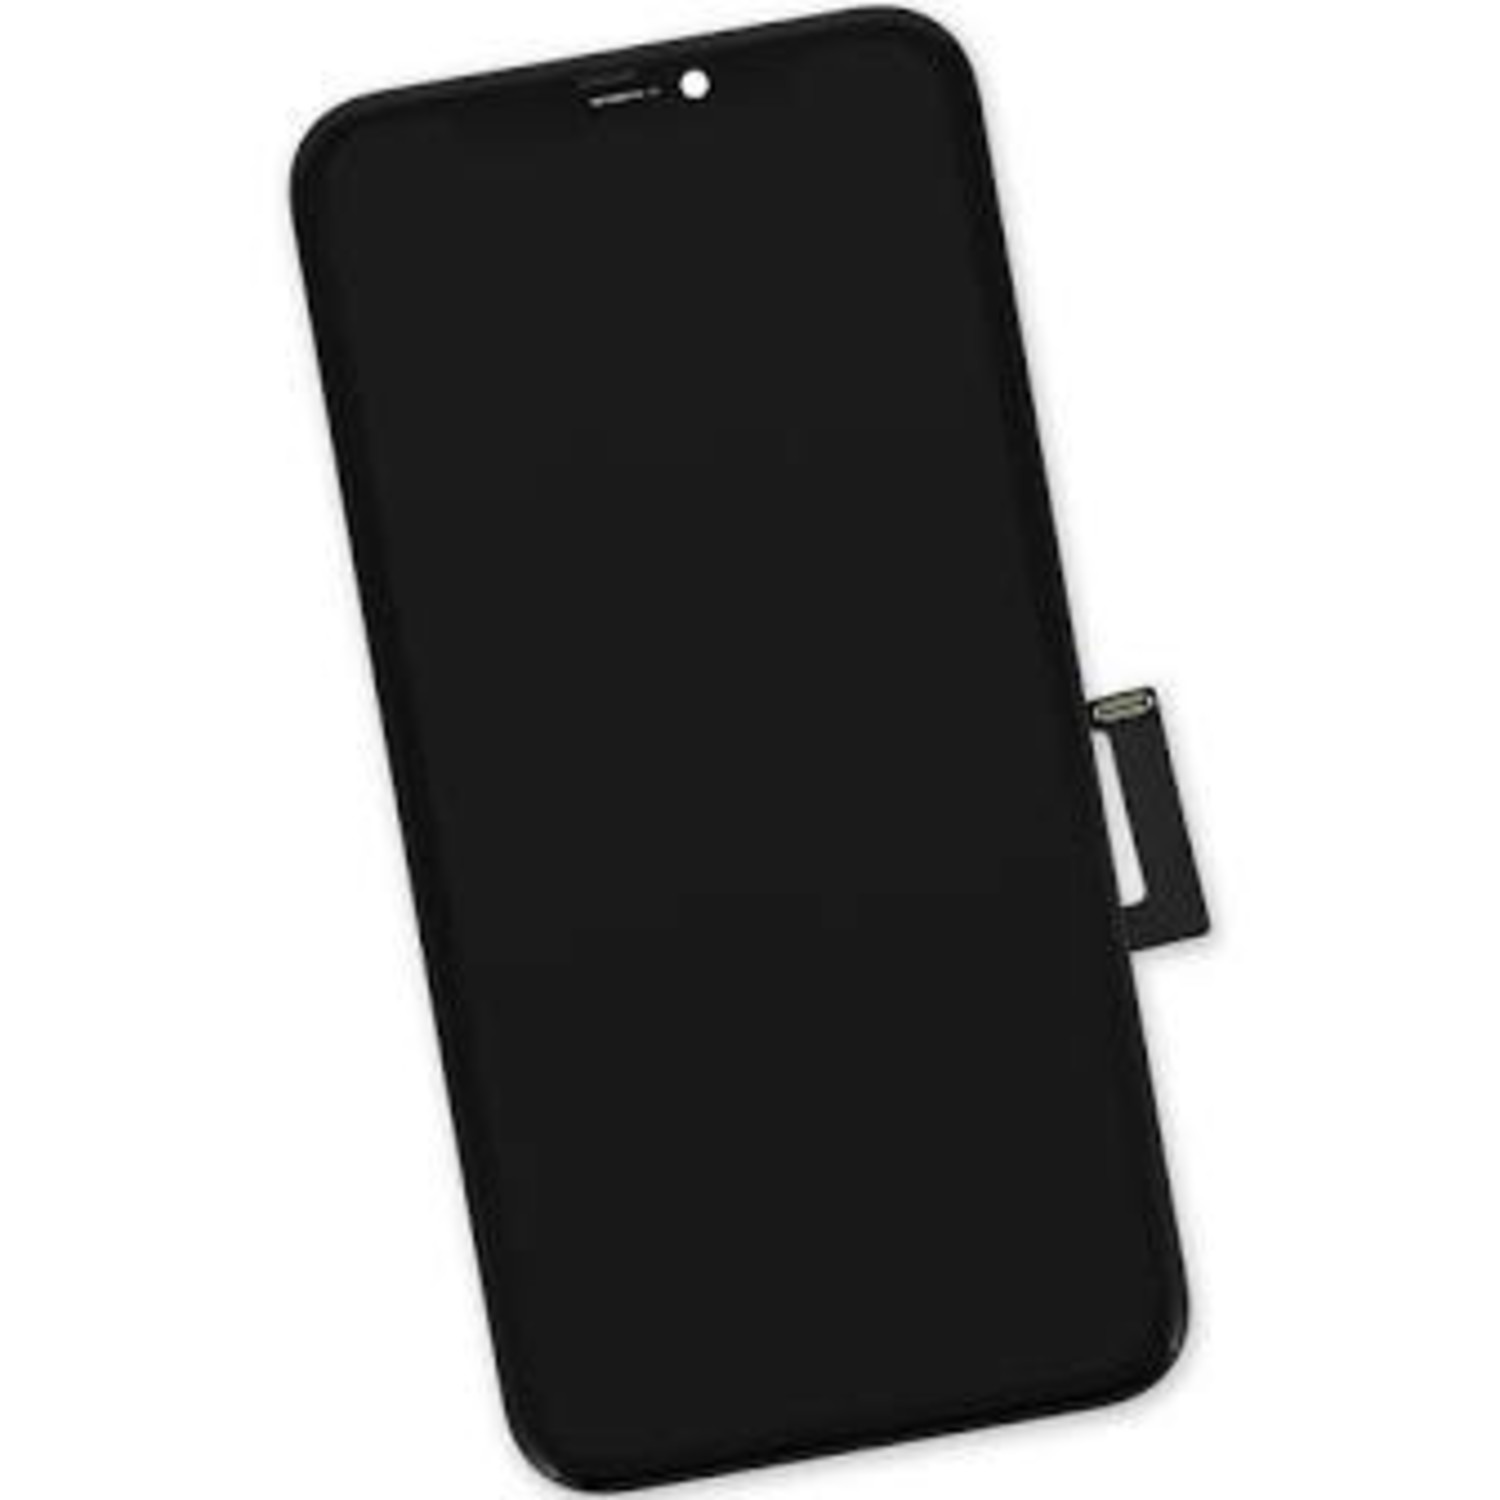 iPHONE 11 LCD AND DIGITIZER - iMobile